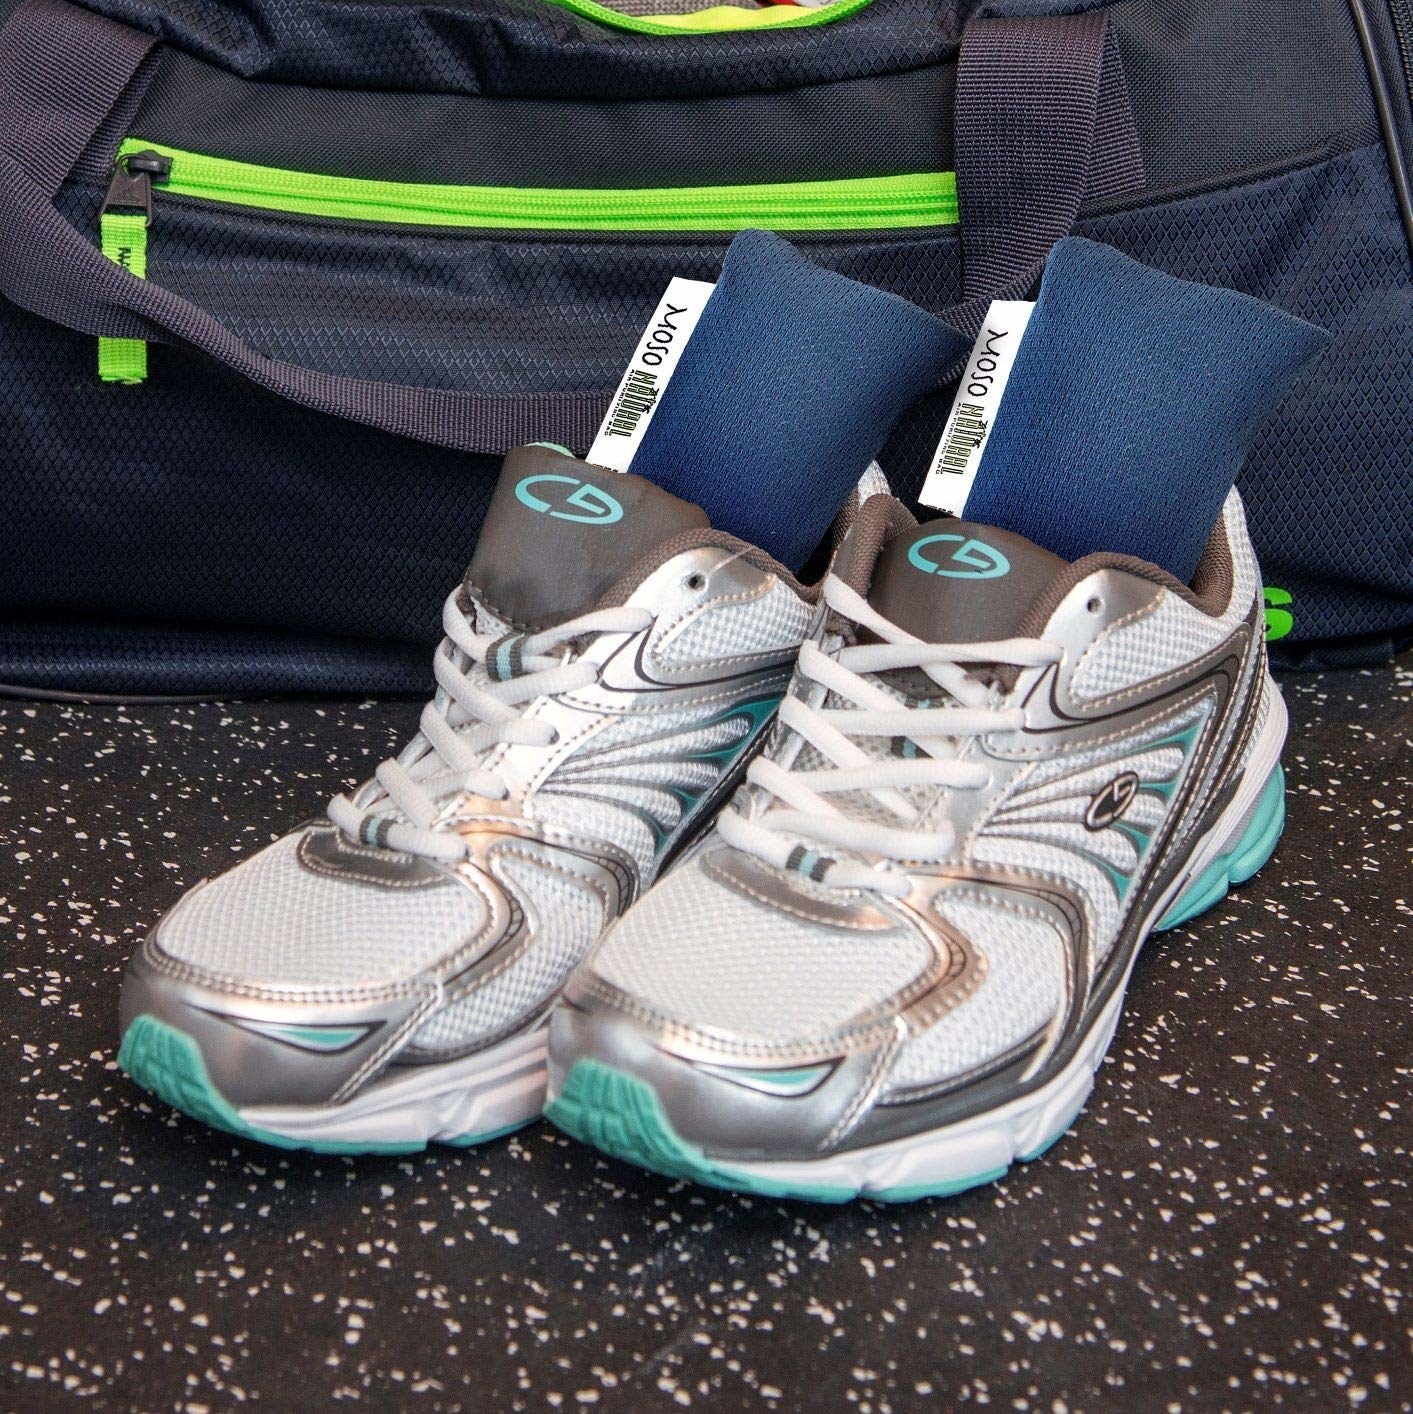 A set of navy blue bean bag deodorizers in a pair of running shoes 